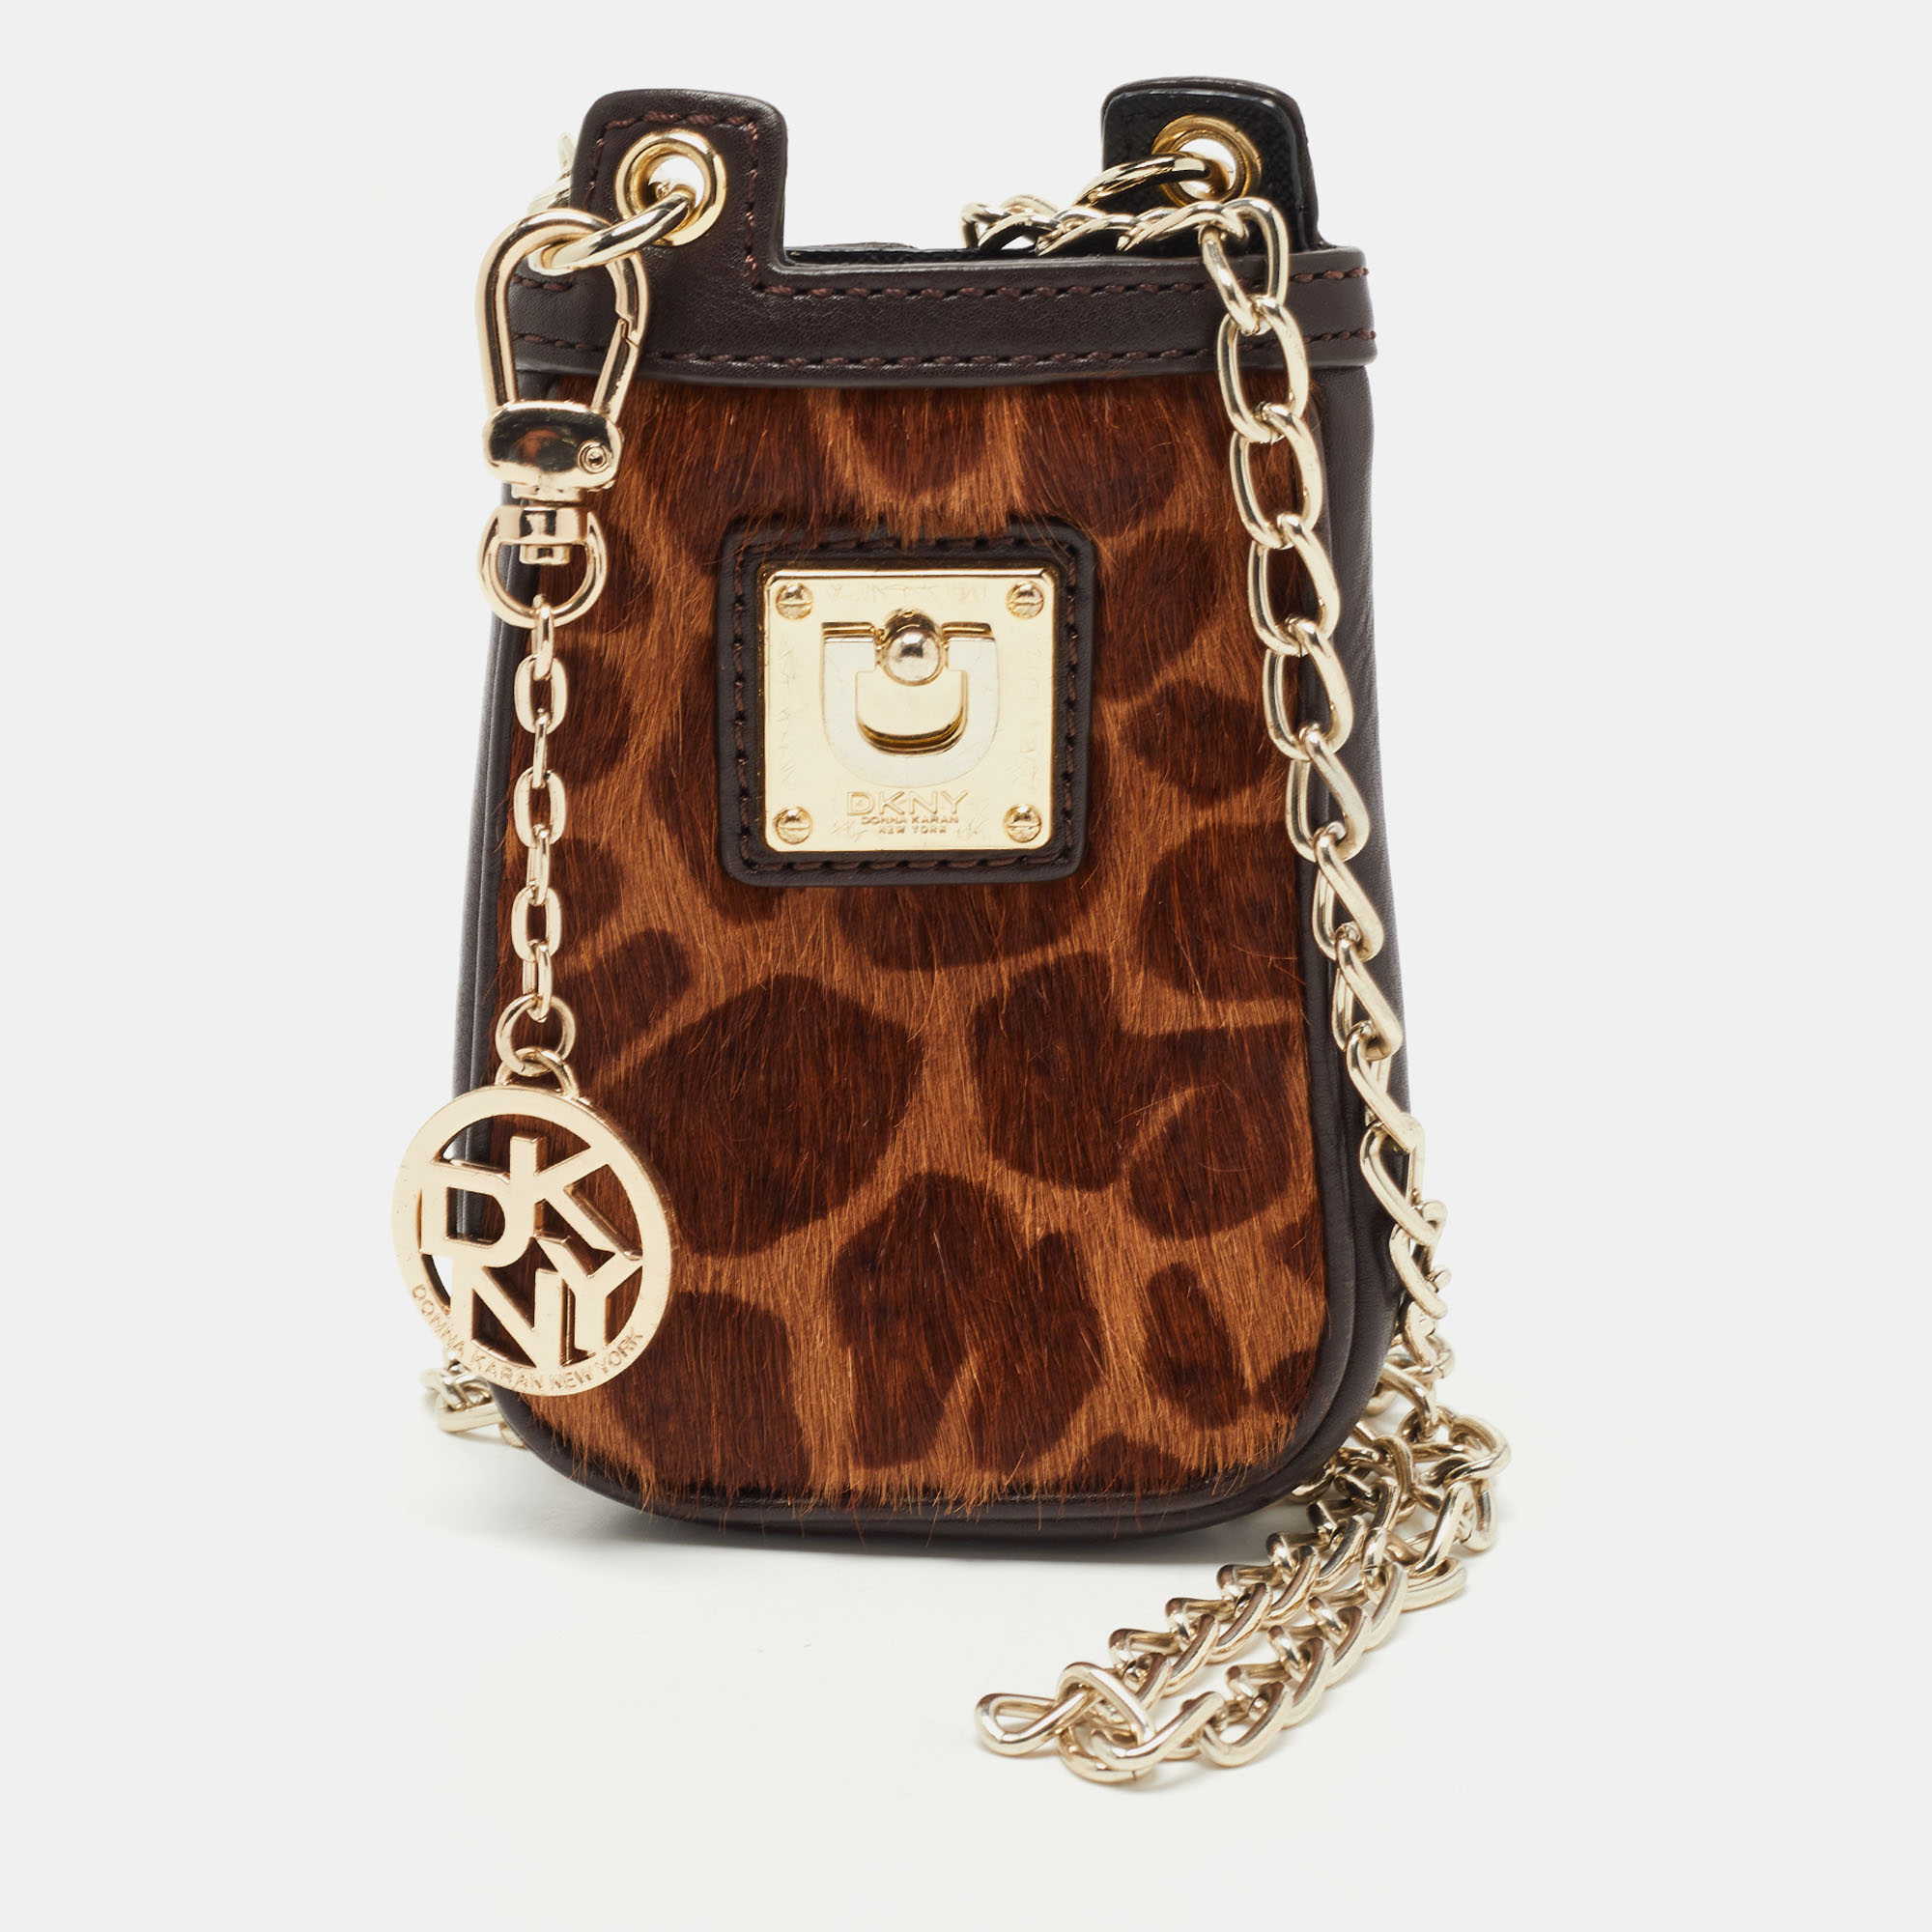 

DKNY Brown Leopard Print Calfhair and Leather Chain Phone Case